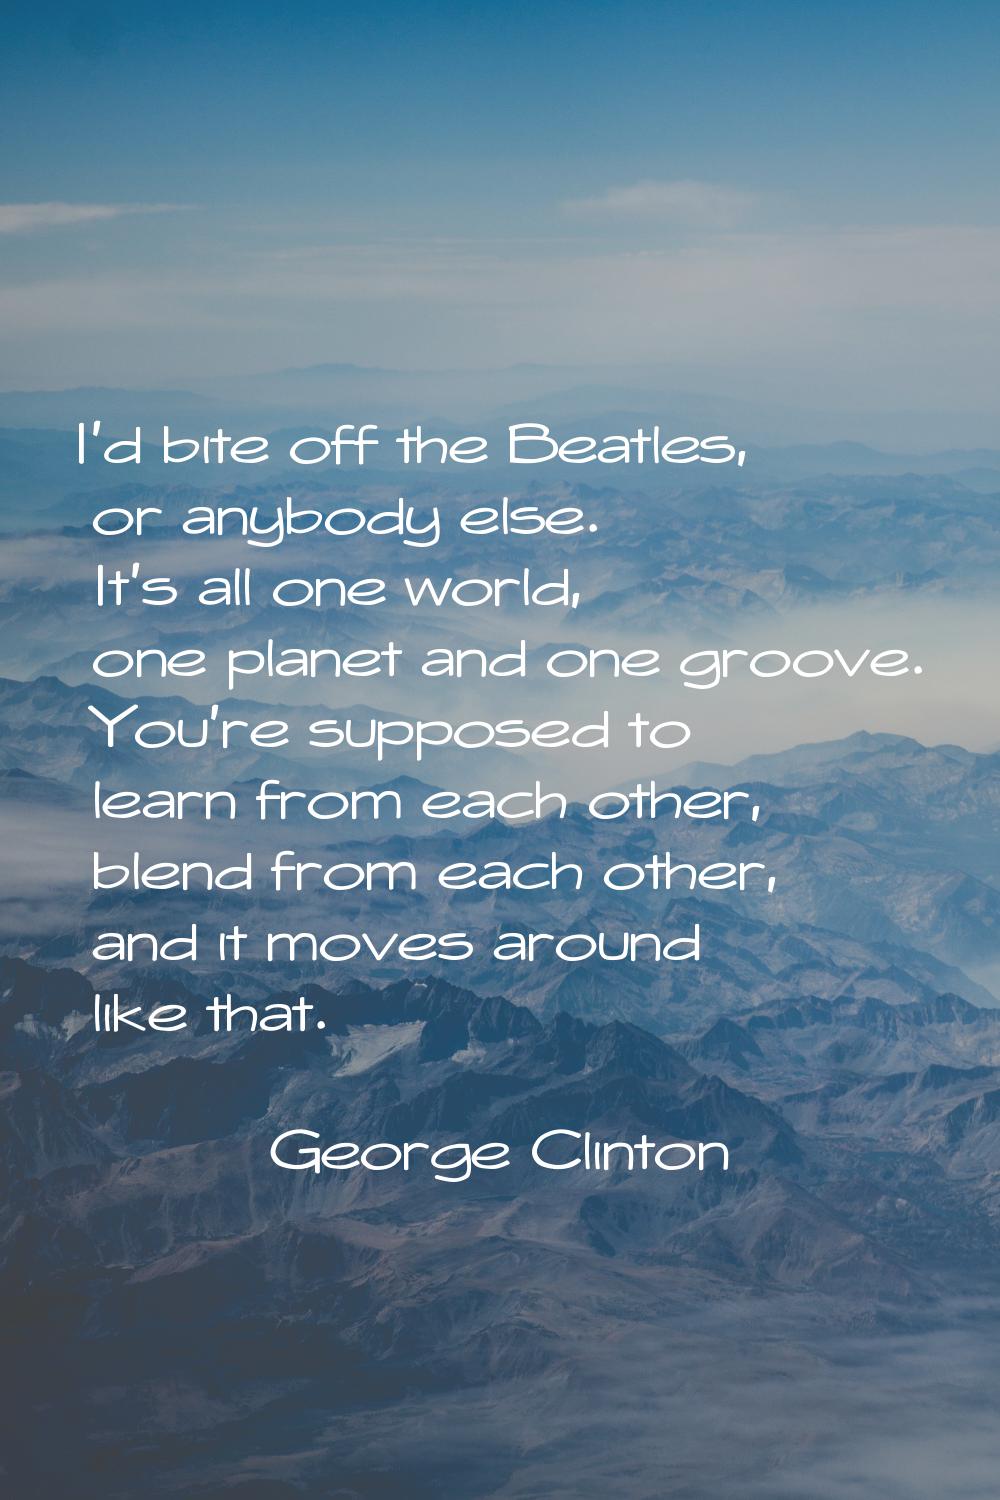 I'd bite off the Beatles, or anybody else. It's all one world, one planet and one groove. You're su